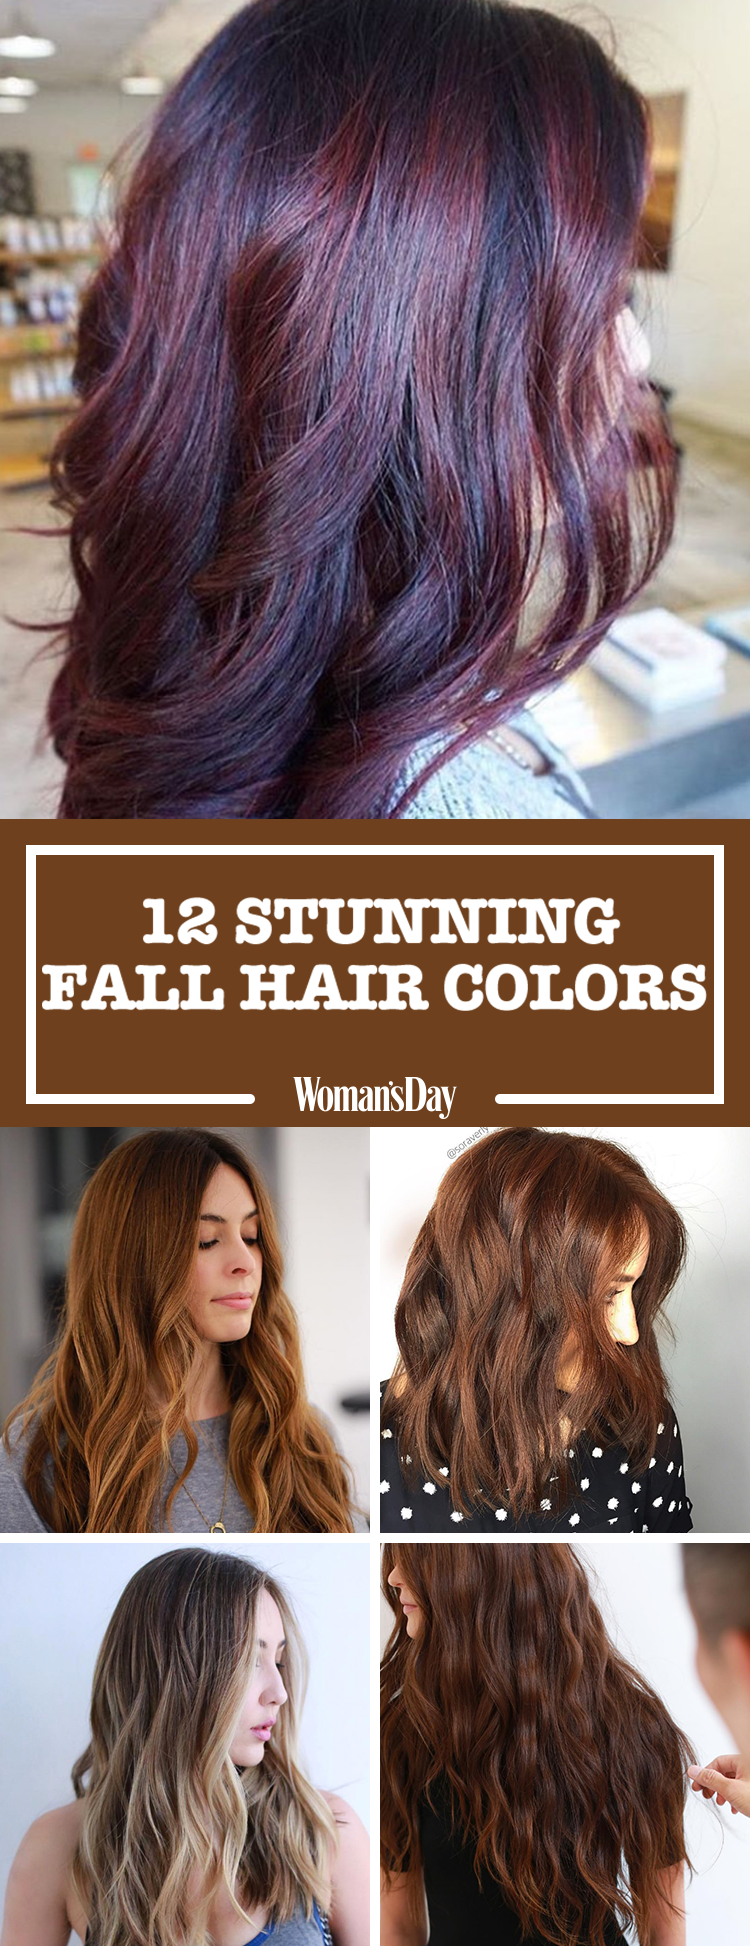 12 Fall Hair Colors 2017 - Best Hair Dyes for Autumn